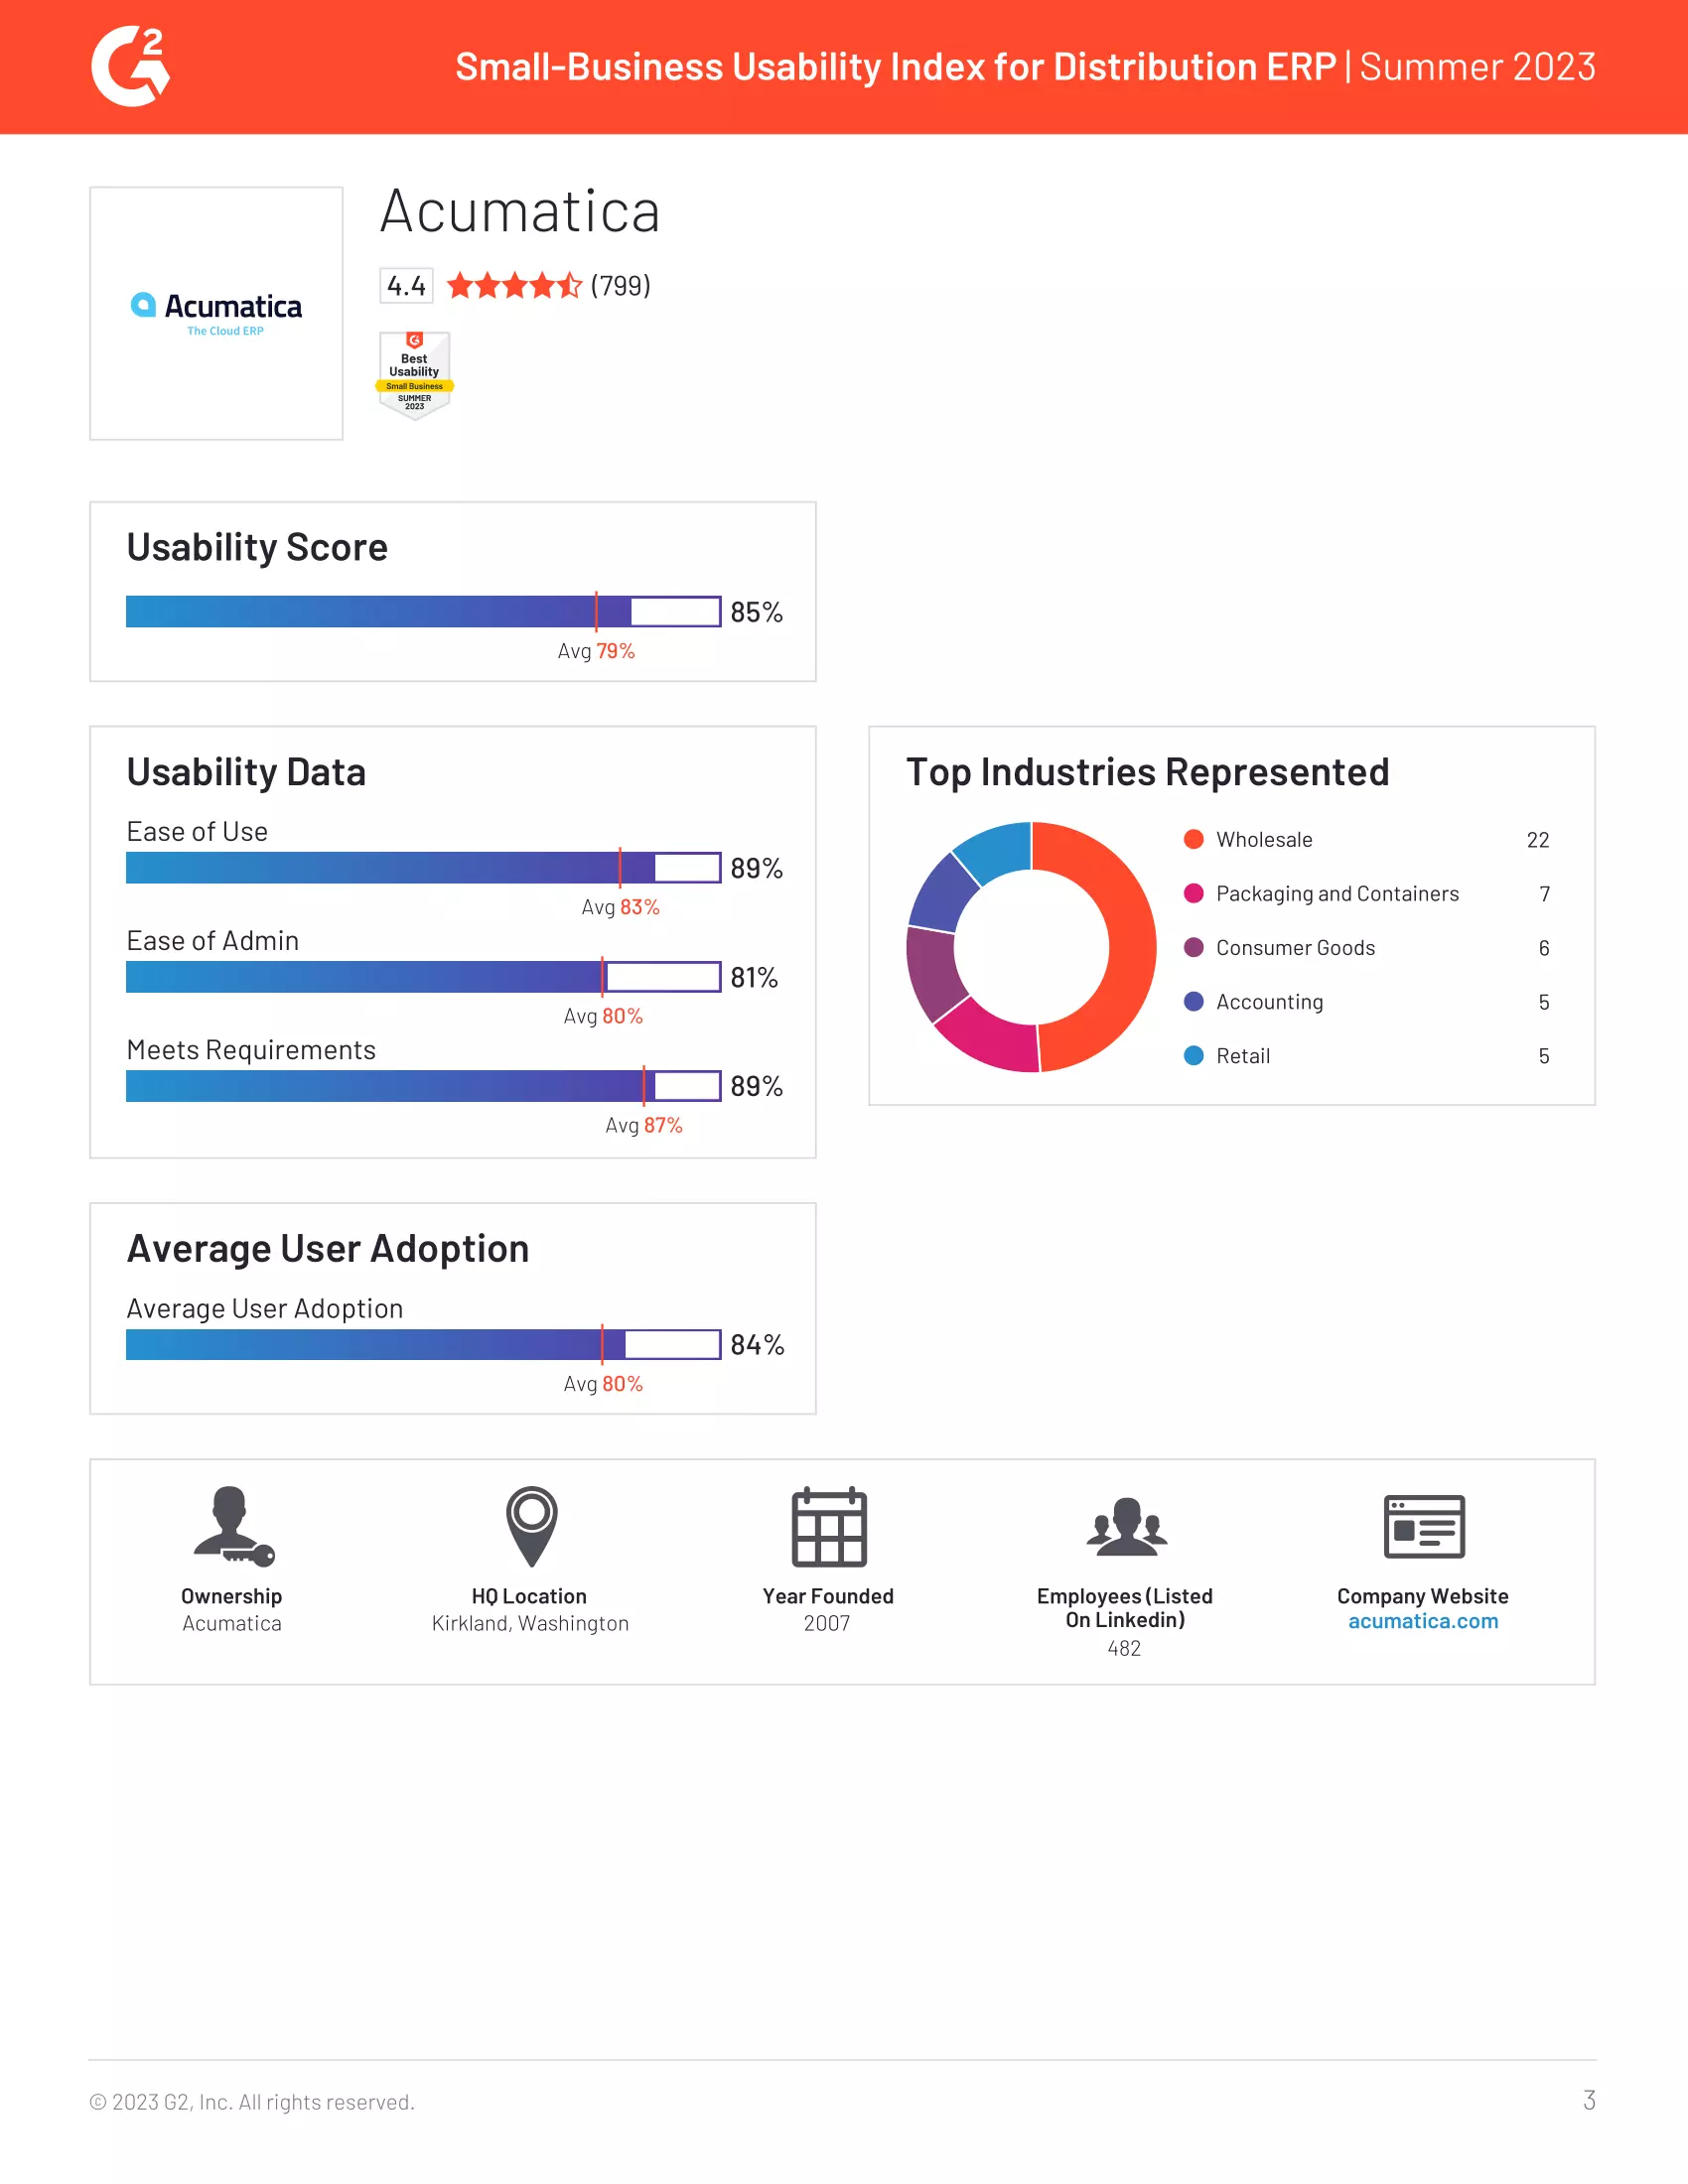 User Friendly: G2 Reviews Acumatica in Its Small-Business Distribution ERP Usability Index, page 2